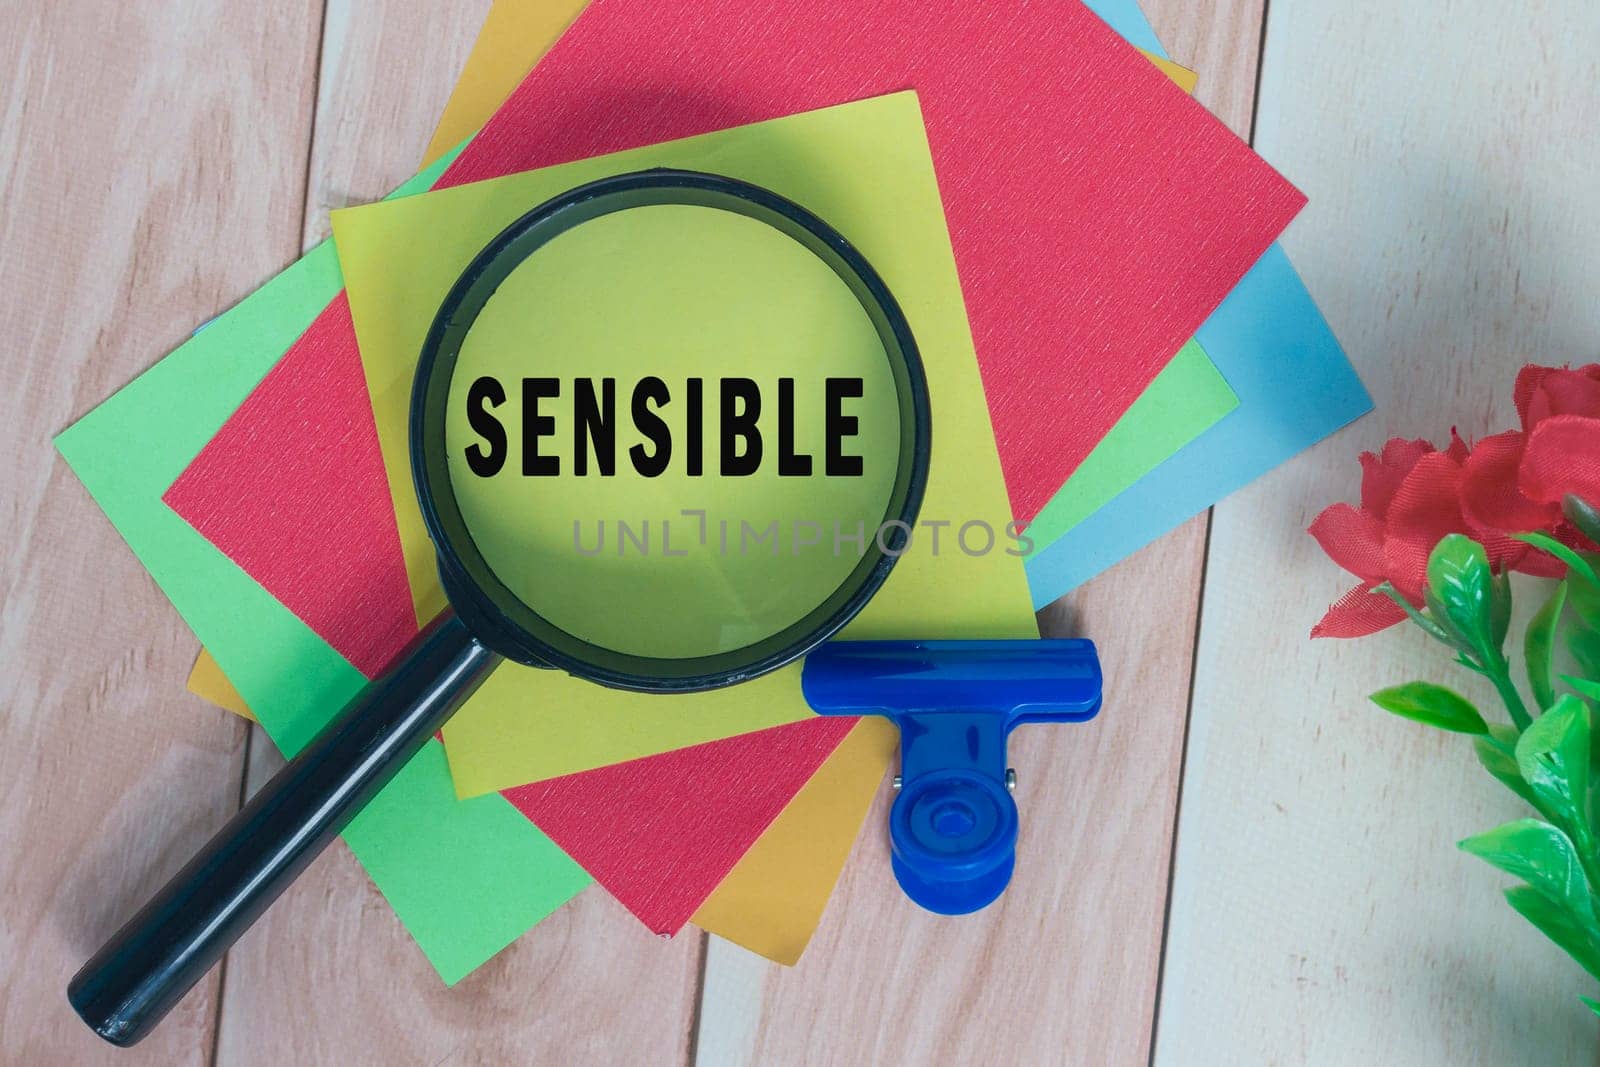 Sensible word on colorful adhesive paper with magnifying glass on wooden desk.